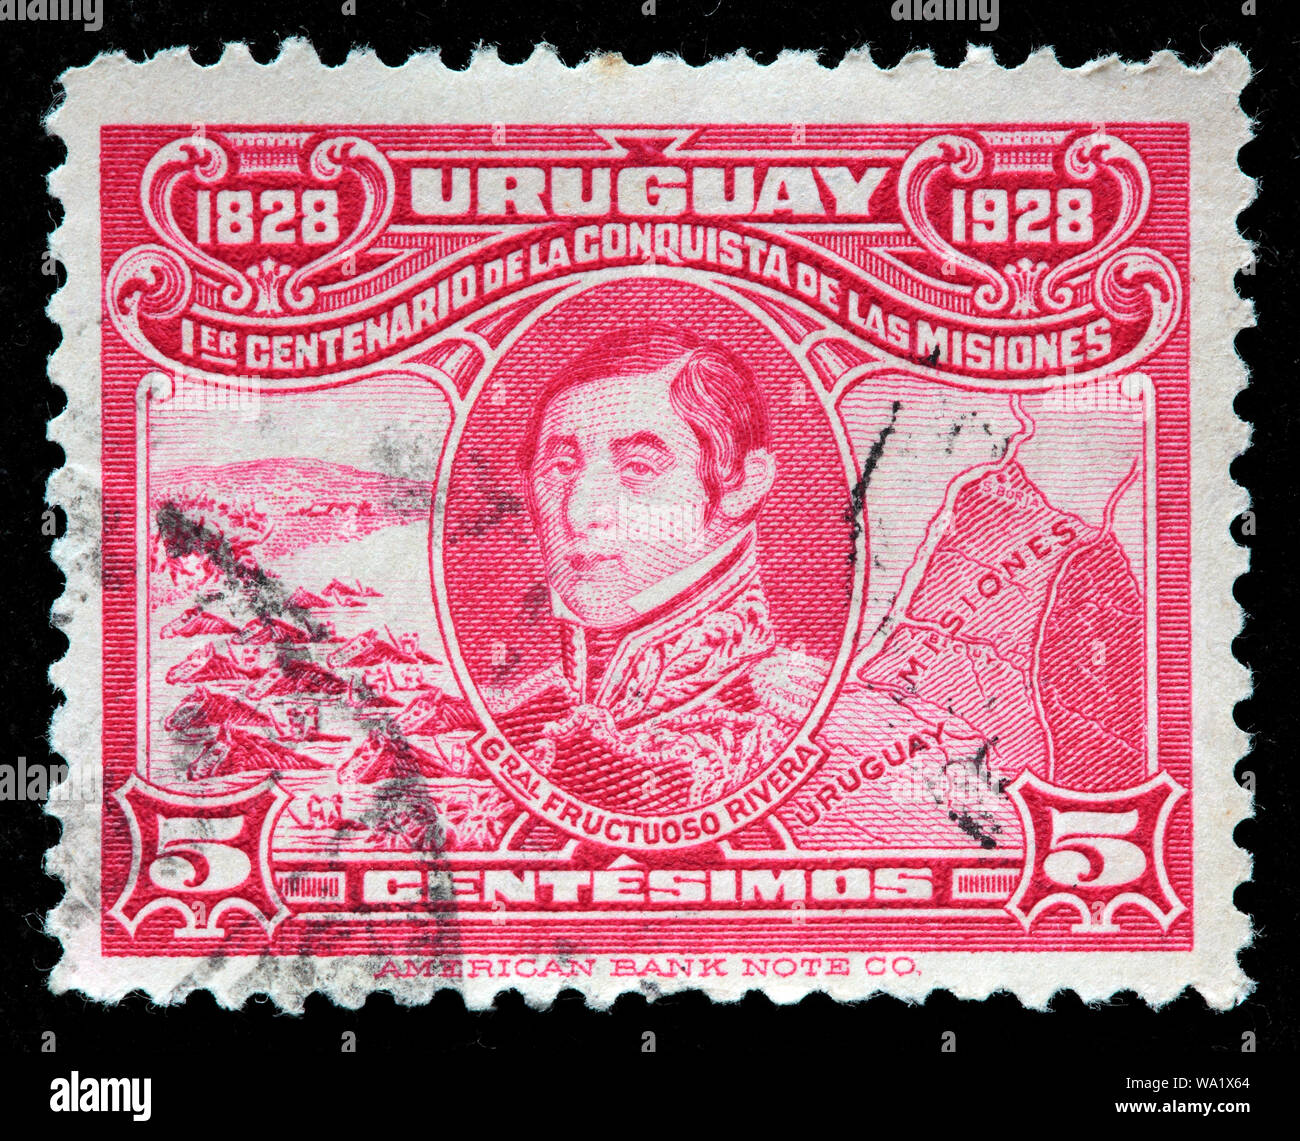 Fructuoso Rivera (1784-1854), Uruguayan general and map of Misiones, postage stamp, Uruguay, 1928 Stock Photo